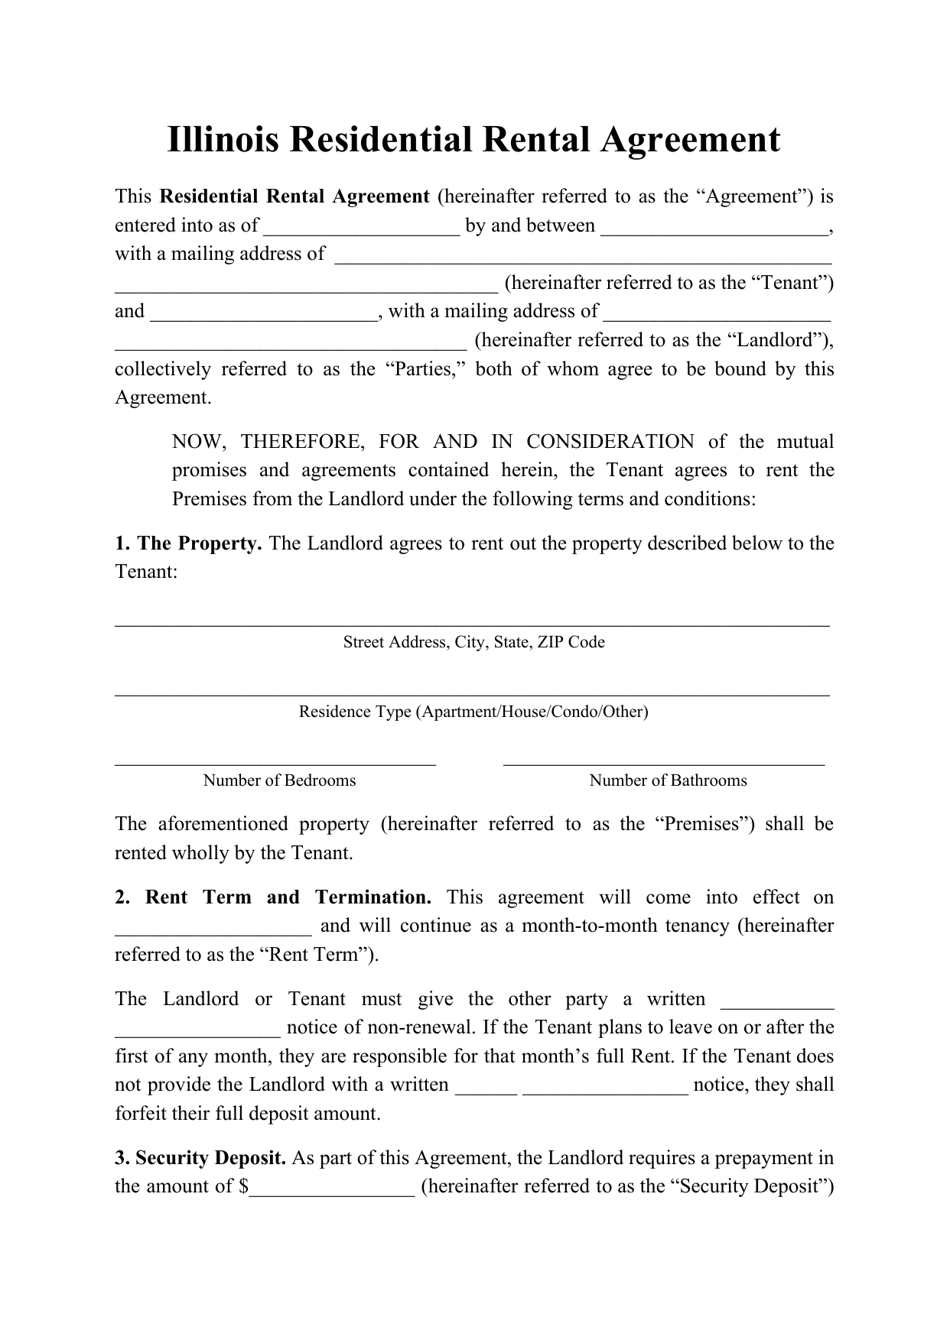 illinois residential rental agreement template download printable pdf templateroller